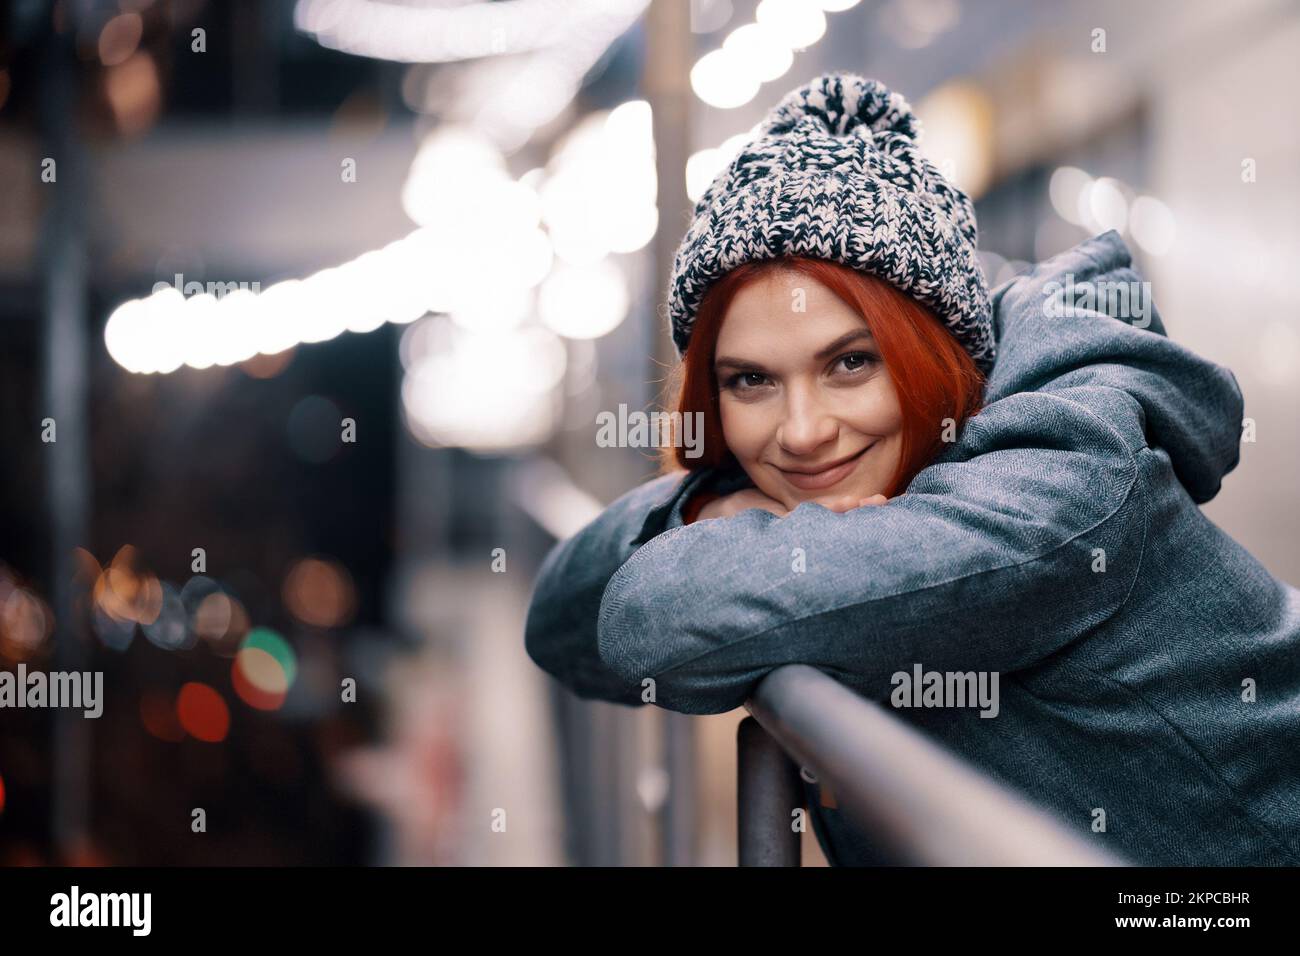 Outdoor night photo of young beautiful happy smiling girl enjoying festive decoration, in street of european city, wearing knitted beanie hat Stock Photo